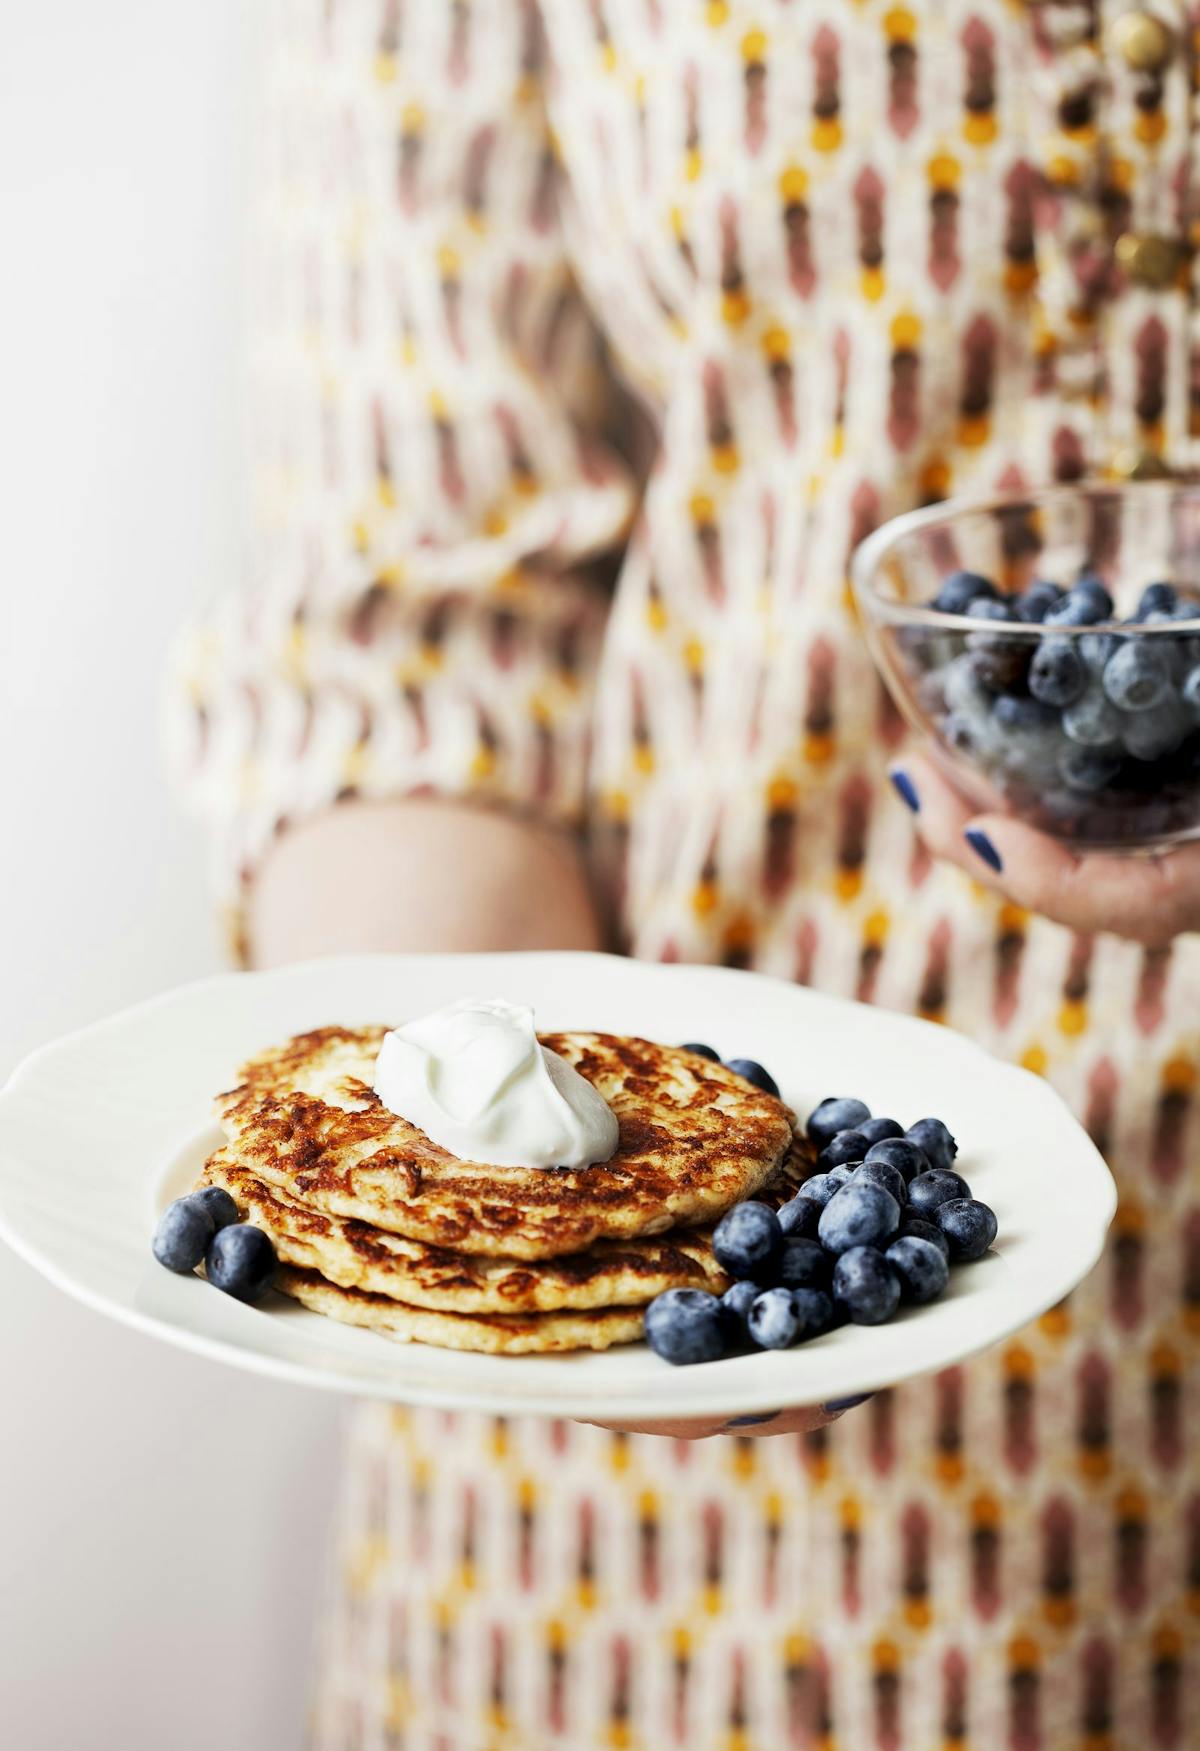 Keto pancakes with berries and whipped cream